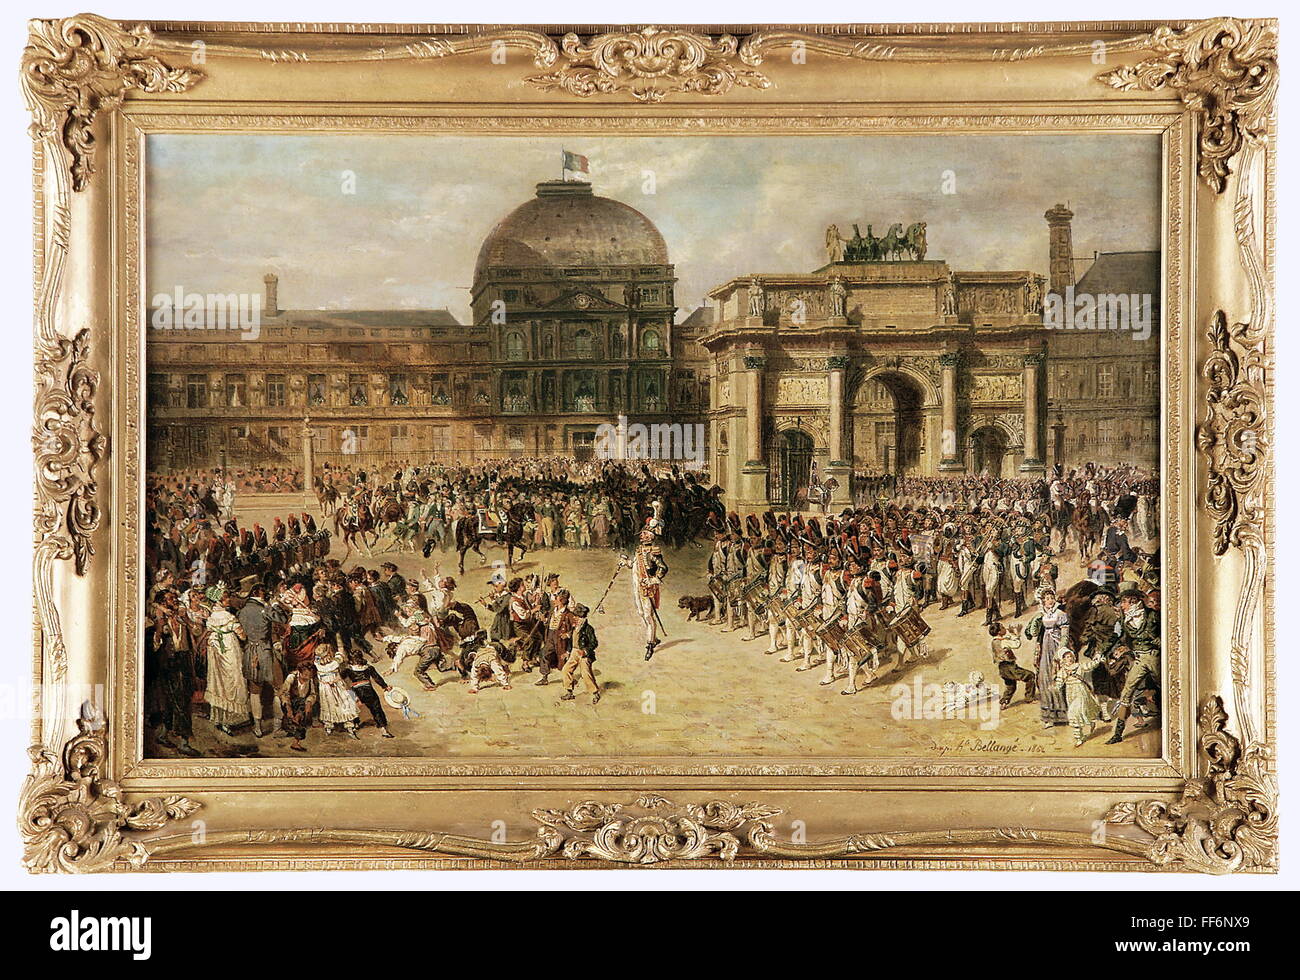 military, France, French Imperial Guard, parade in front of the Louvre, 1810, copy of a painting by Hippolyte Bellange & Adrien Dauzats, copy made in 1852, oil on canvas, 'Un jour de revue sous l' Empire', Additional-Rights-Clearences-Not Available Stock Photo